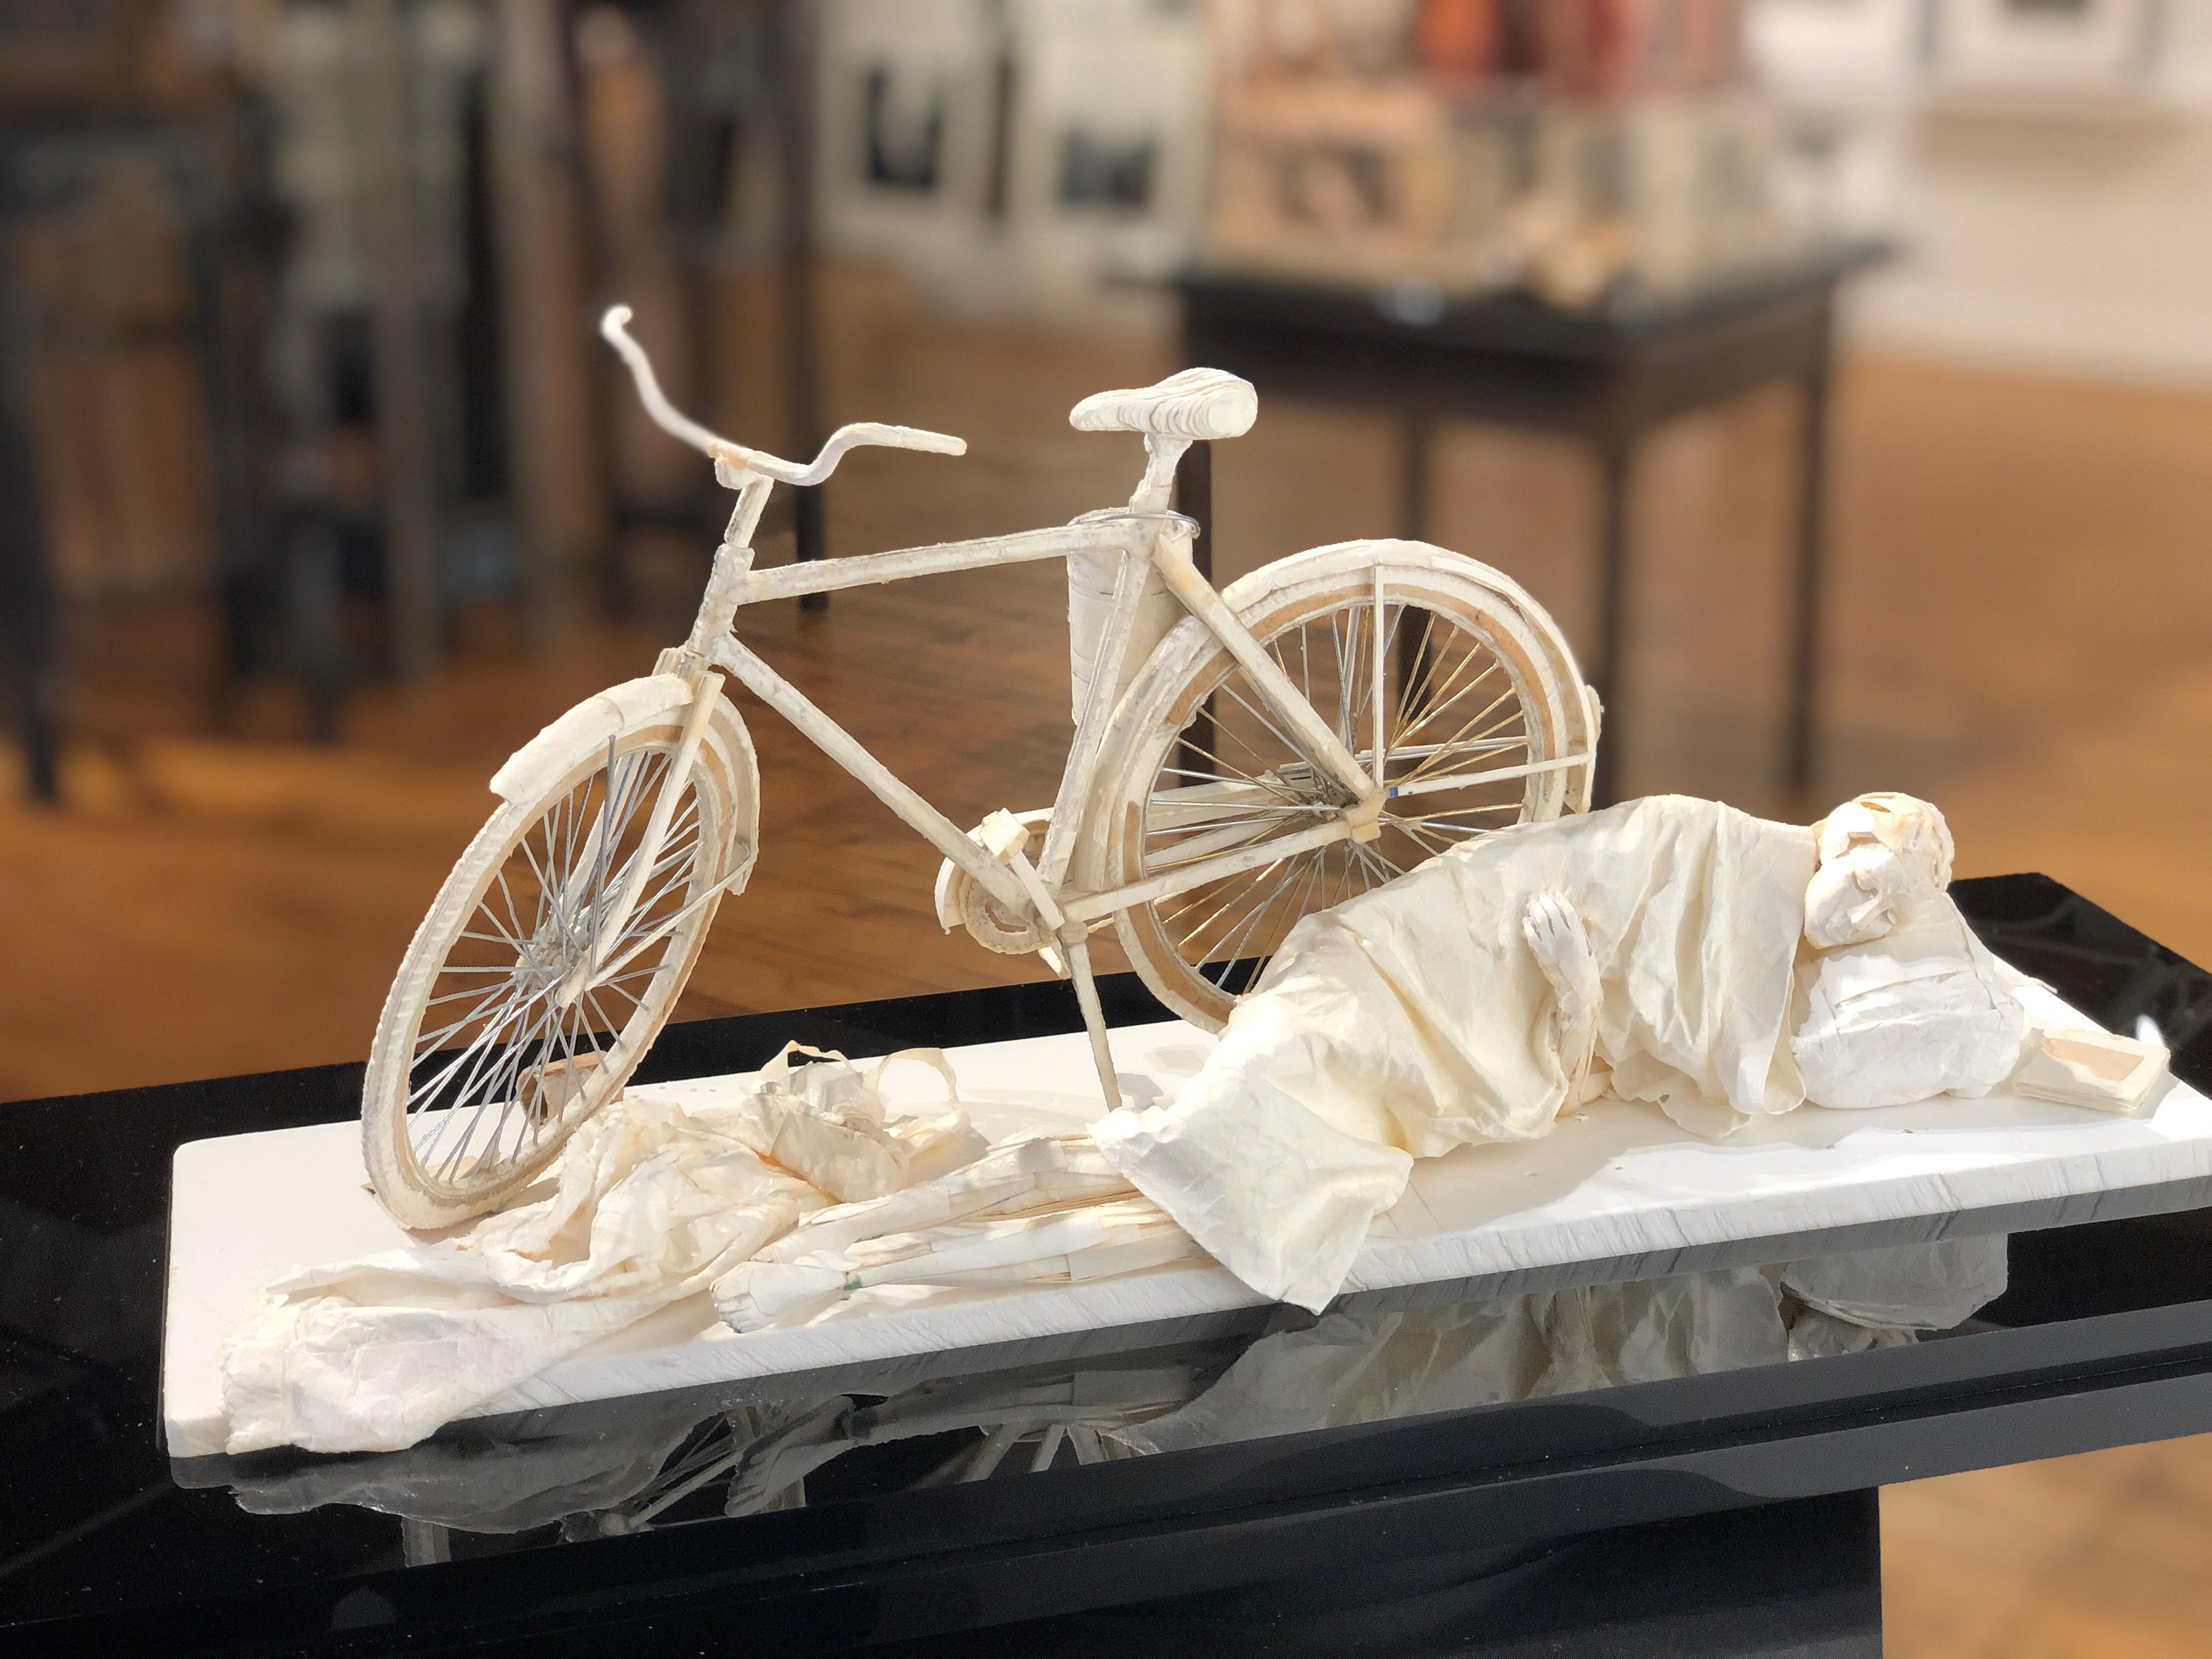 Nightfall - Highly Detailed Paper Sculpture of Sleeping Figure & Bicycle